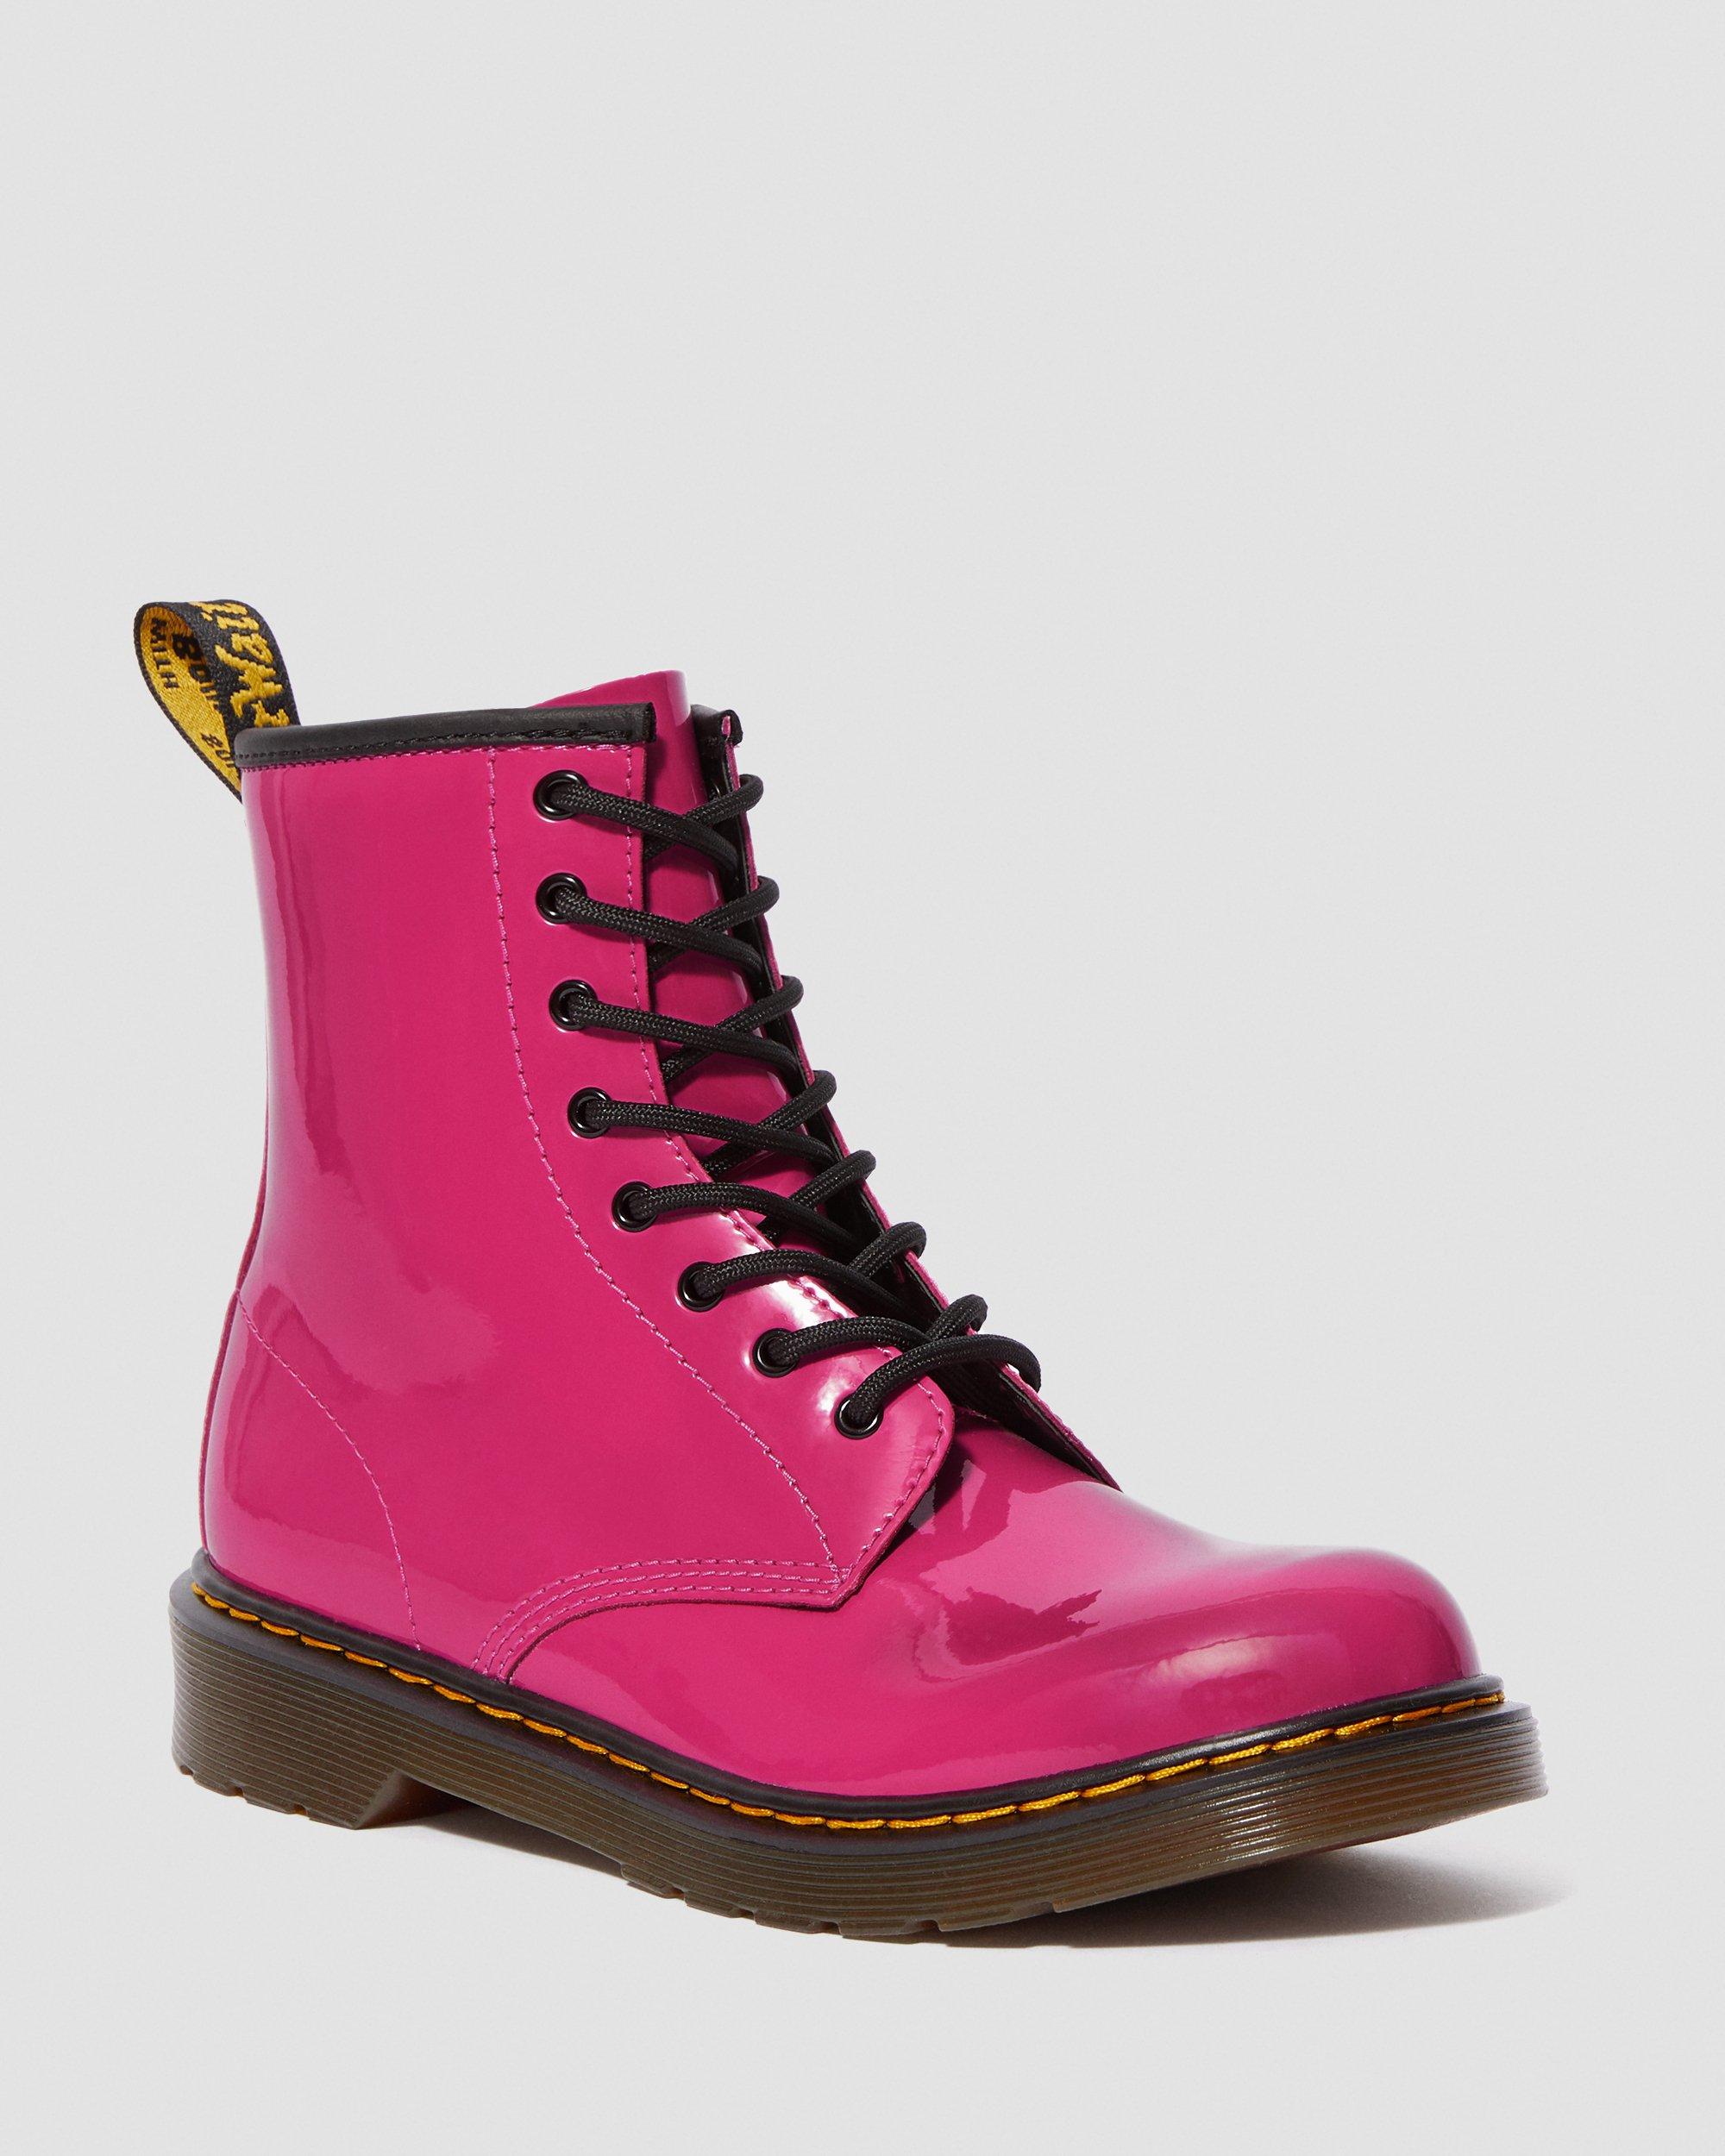 Youth 1460 Patent Leather Lace Up Boots in Hot Pink | Dr. Martens